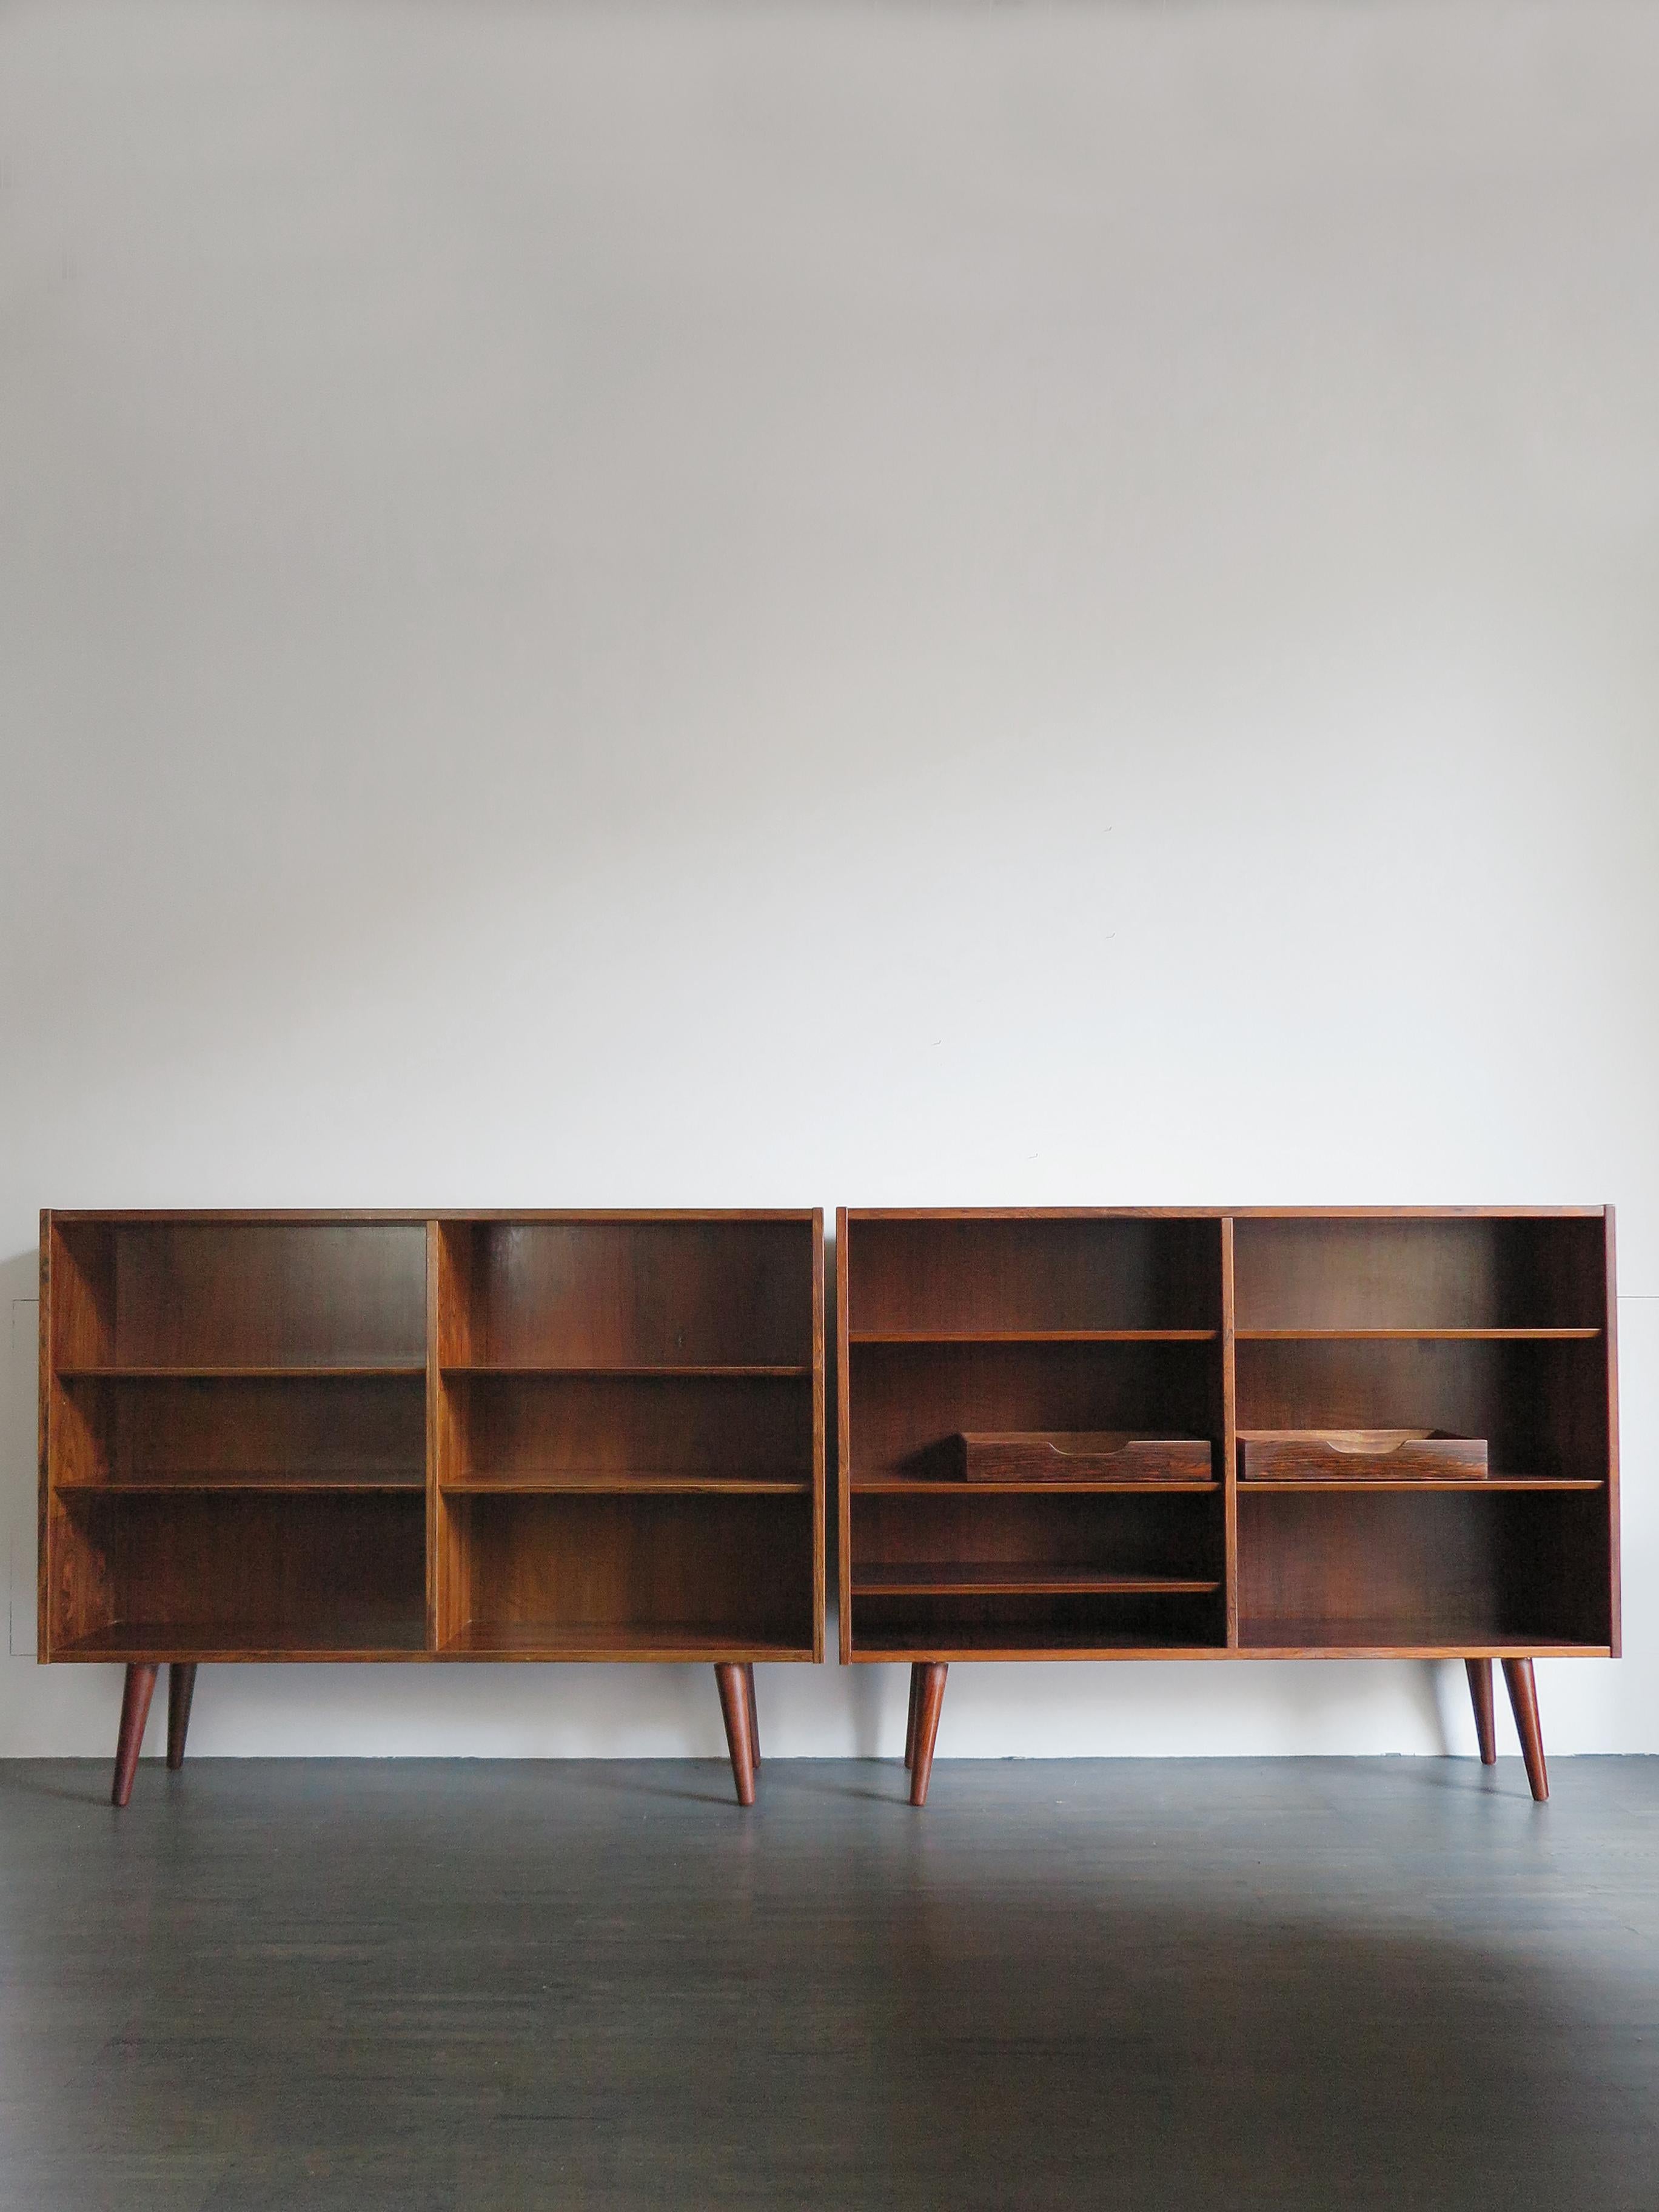 Midcentury modern design scandinavian darkwood set of two bookcases designed by Poul Hundevad and produced by Hundevad & Co. in the 1960s, variable height position of shelves and two freely movable storage boxes, Denmark 1960s

Please note that